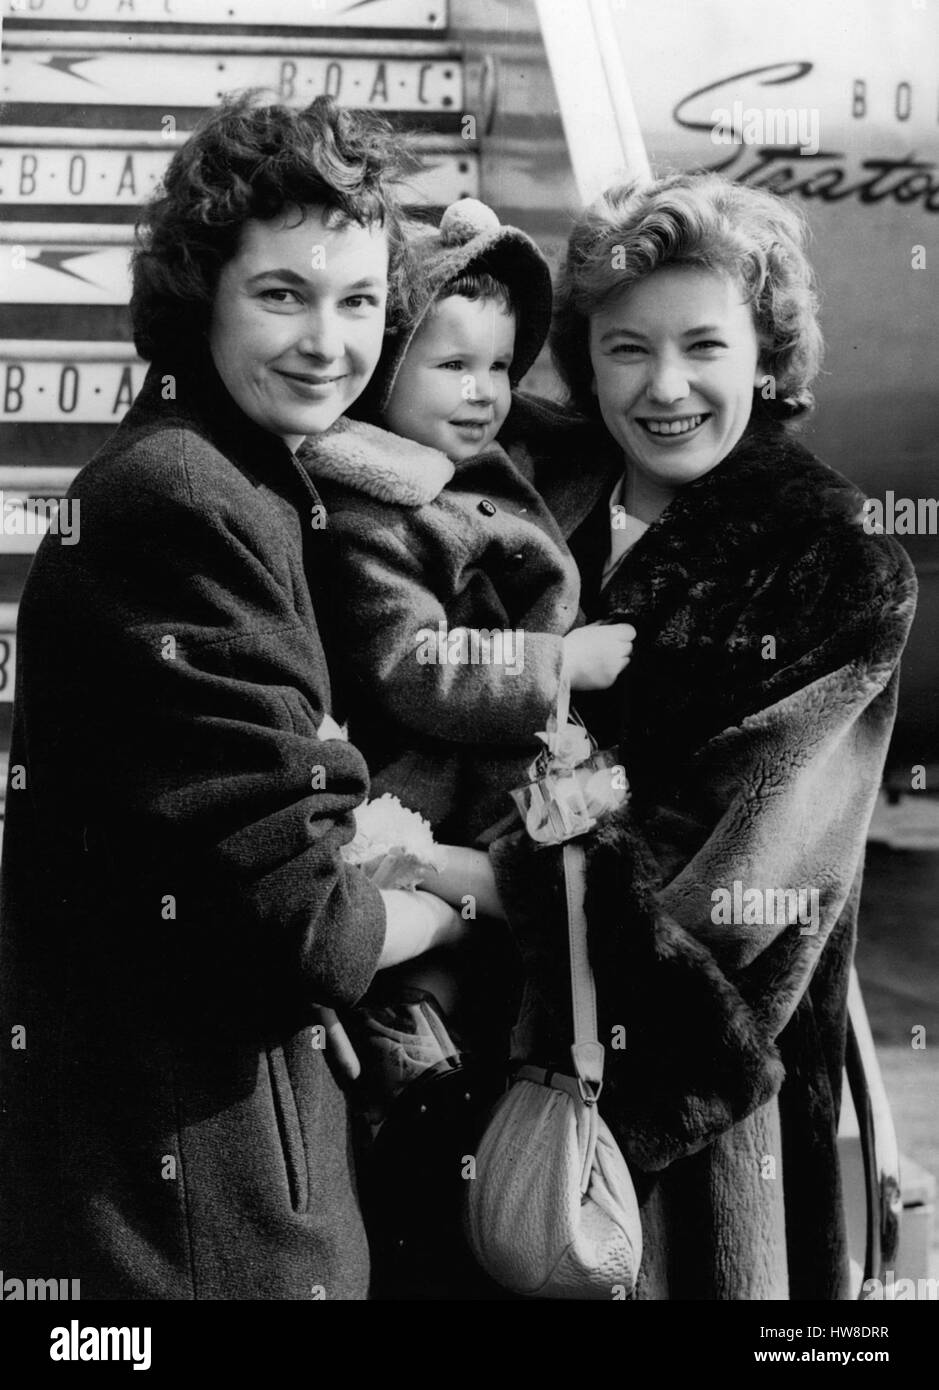 Mar. 28, 1956 - 28-3-56 Ruby Murray returns with her sister Ã¢â‚¬' Popular British singing star, Ruby Murray, arrived at London Airport today with her sister, Mrs. Lilian Duffy, whom she had not seen for 17 years, and LillianÃ¢â‚¬â„¢s little daughter, Janice, 2 &frac12;. After making a three-week American tour, Ruby went to Toronto, Canada, to visit her sister. Mrs. Winifred Murray, their mother, who lives in Belfast, was at the airport to greet them. Keystone Photo Shows: Ruby Murray seen with her sister, Mrs. Lillian Duffy and the latterÃ¢â‚¬â„¢s daughter, Janice, after arrival at London A Stock Photo